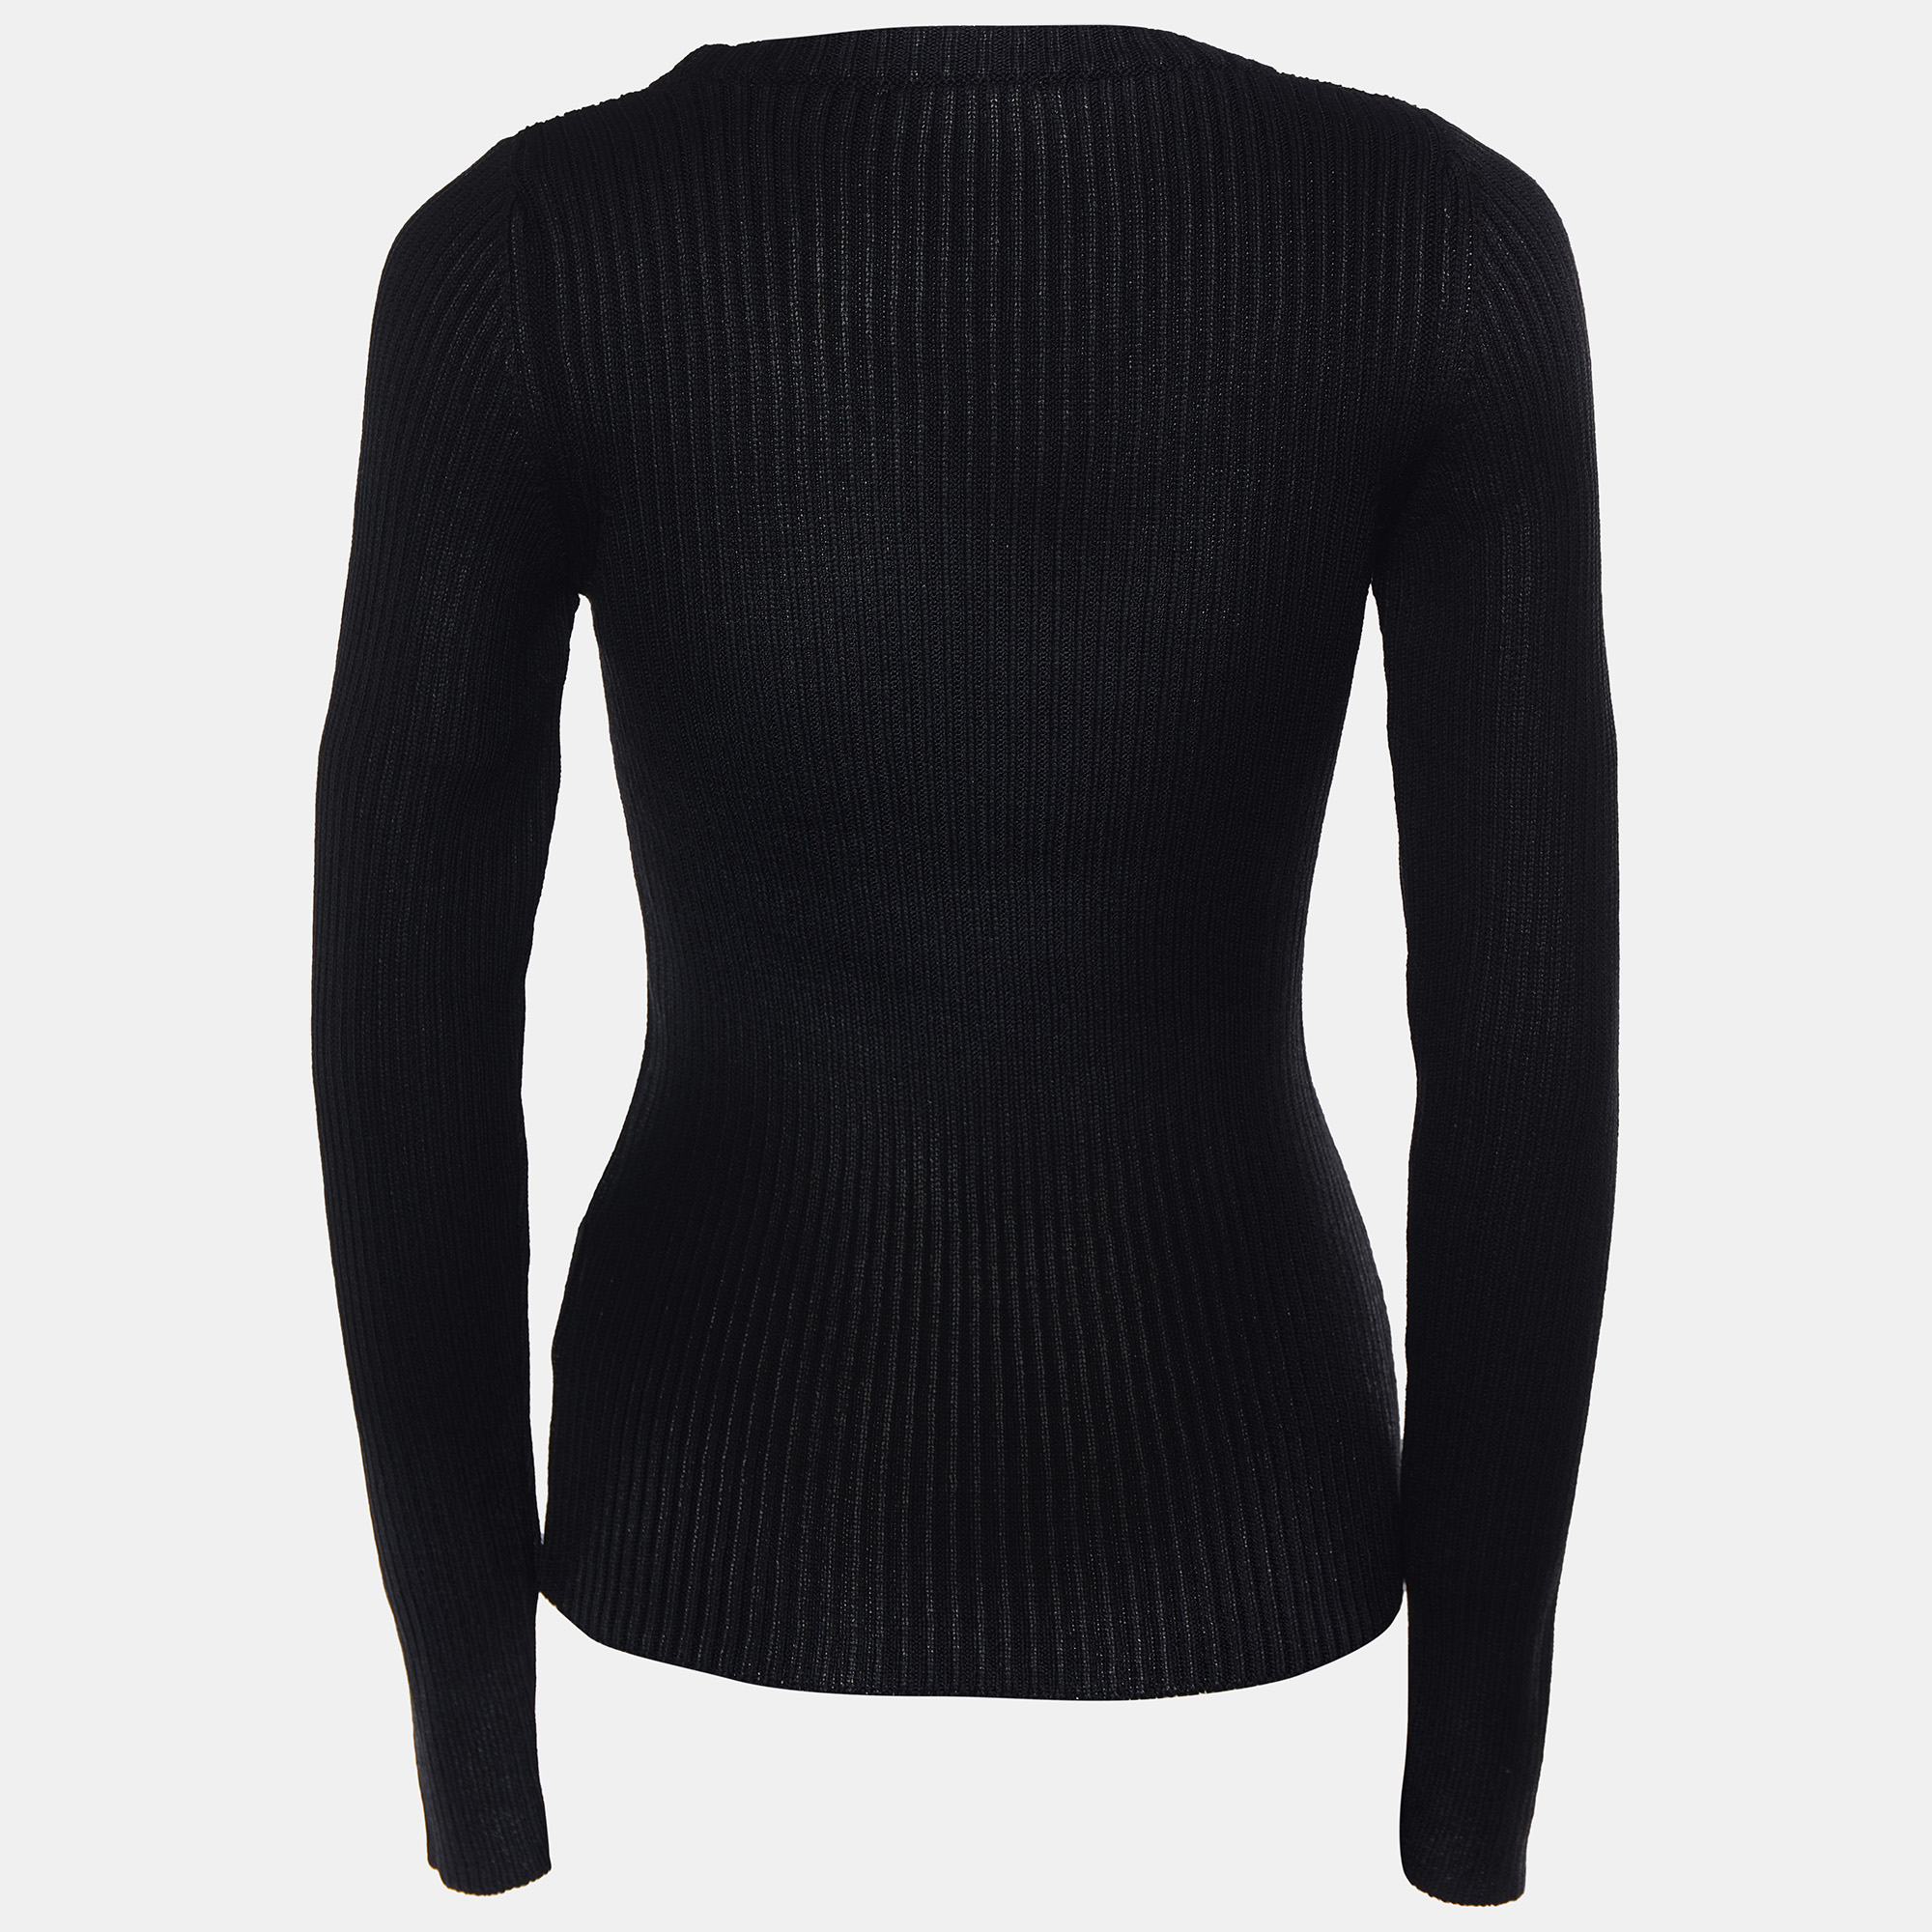 

Versace Jeans Black Textured Rib Knit Roundneck Sweater